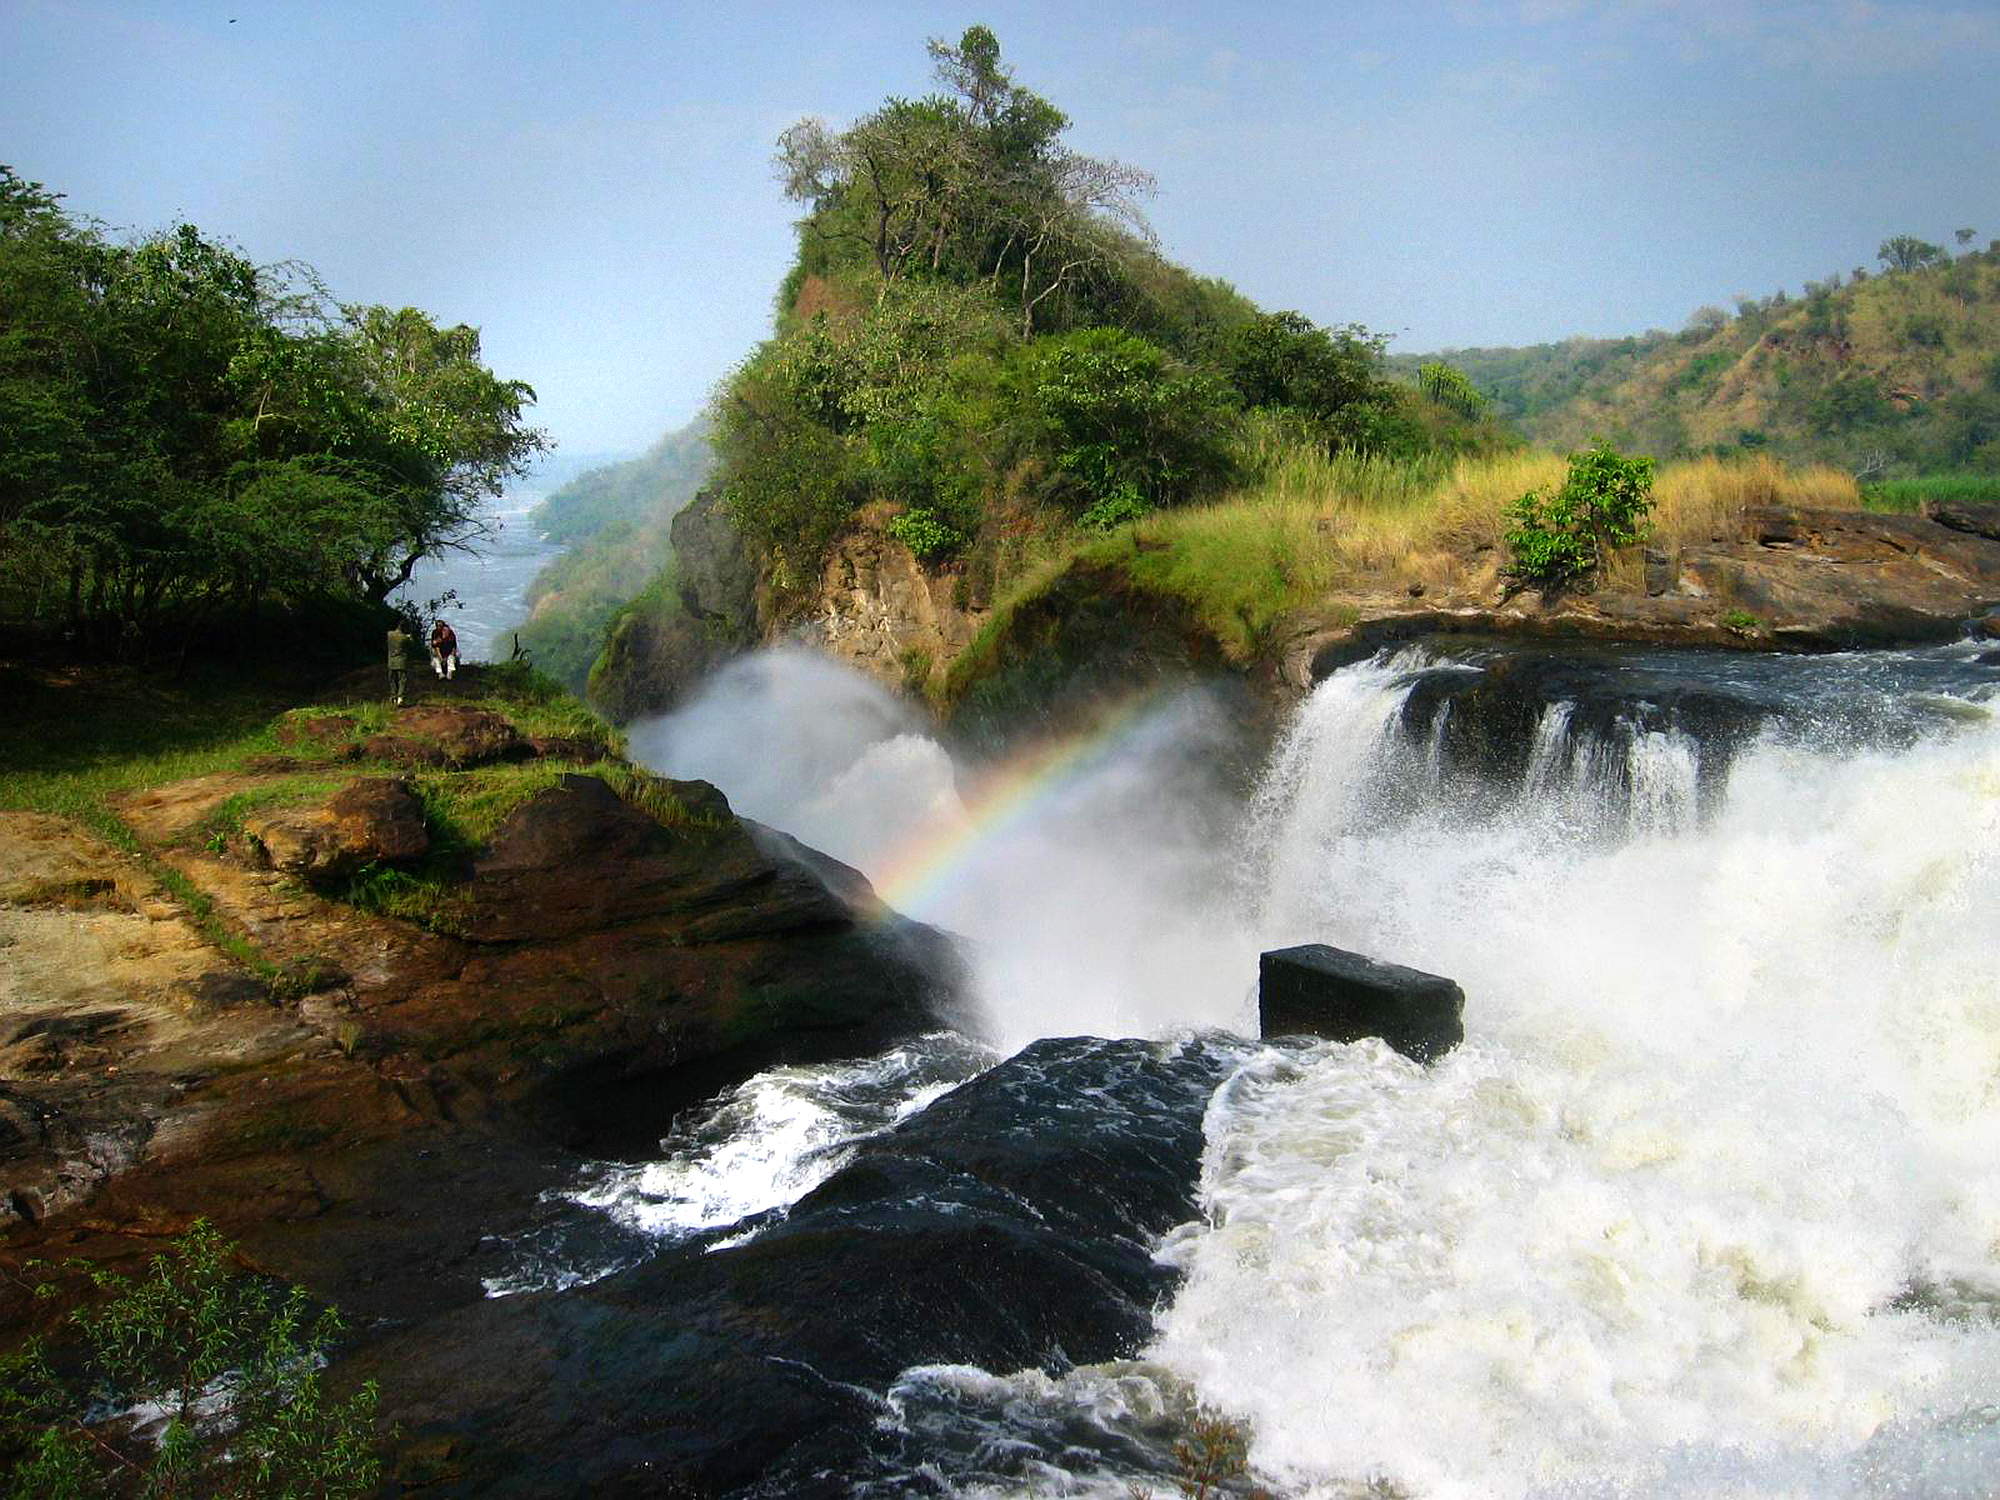 TRANSFER FROM KAMPALA TO MURCHISON FALLS NATIONAL PARK